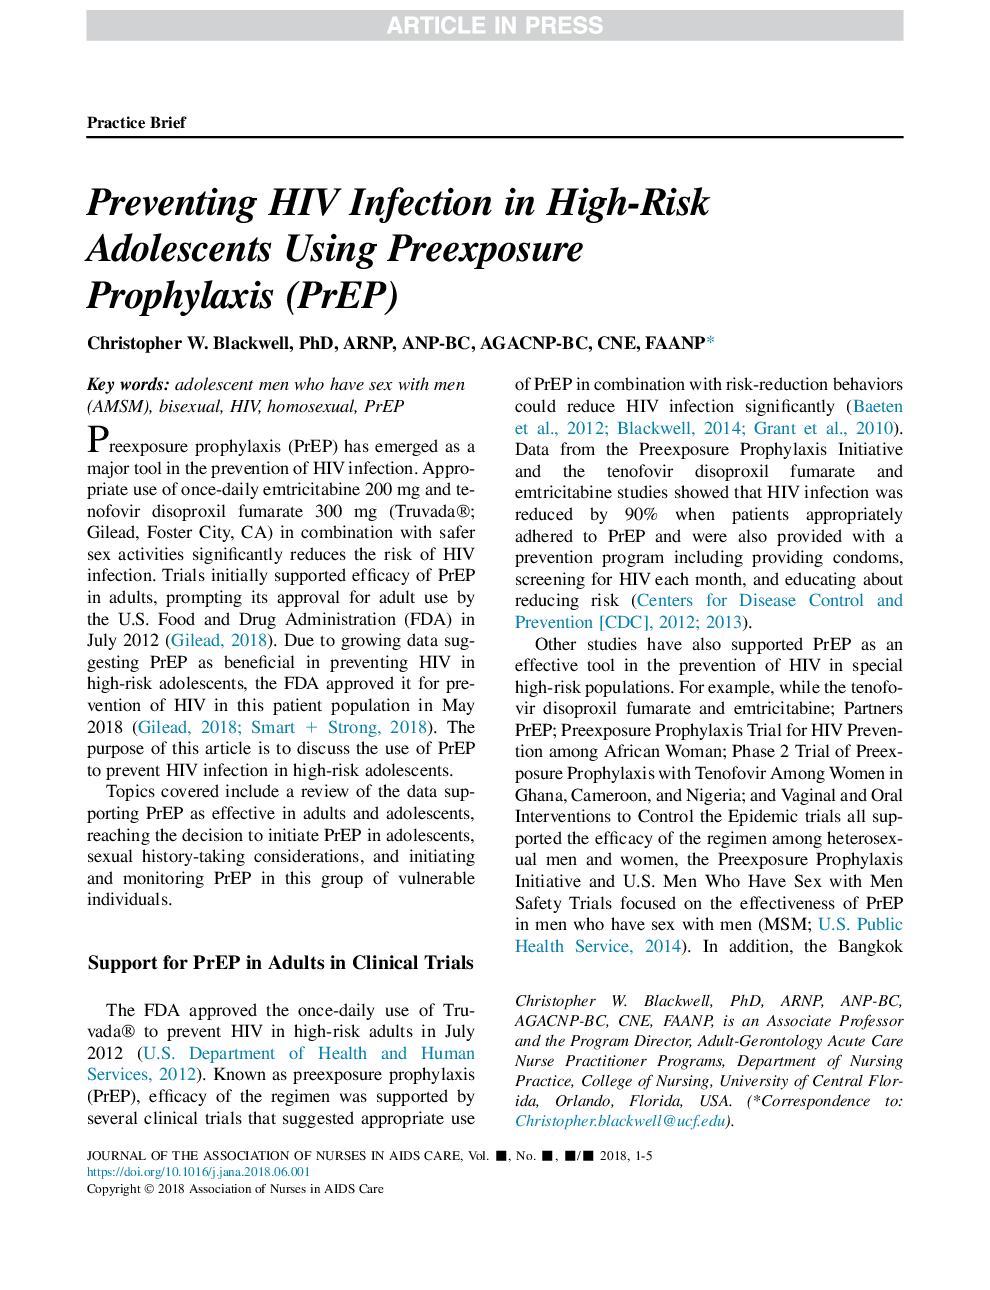 Preventing HIV Infection in High-Risk Adolescents Using Preexposure Prophylaxis (PrEP)